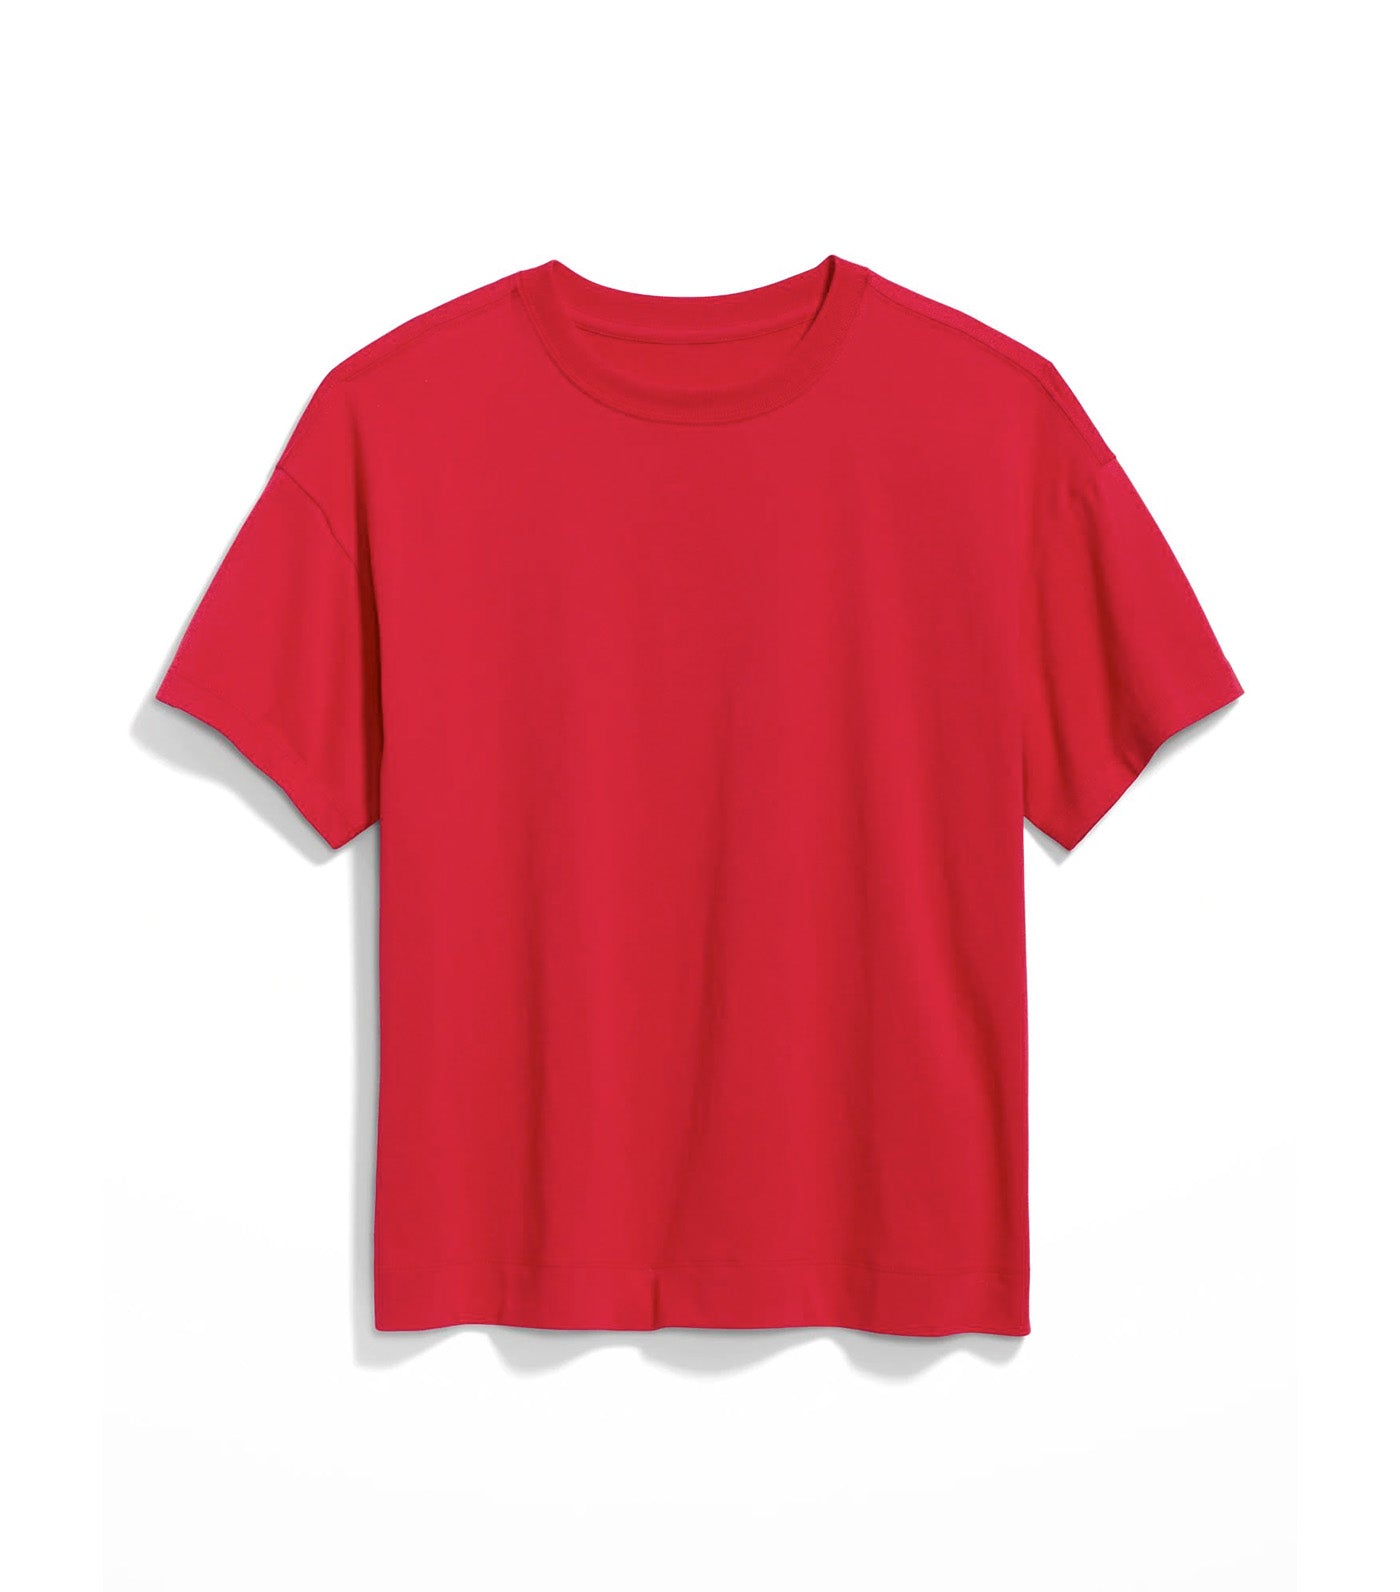 Vintage T-Shirt For Women Red 07